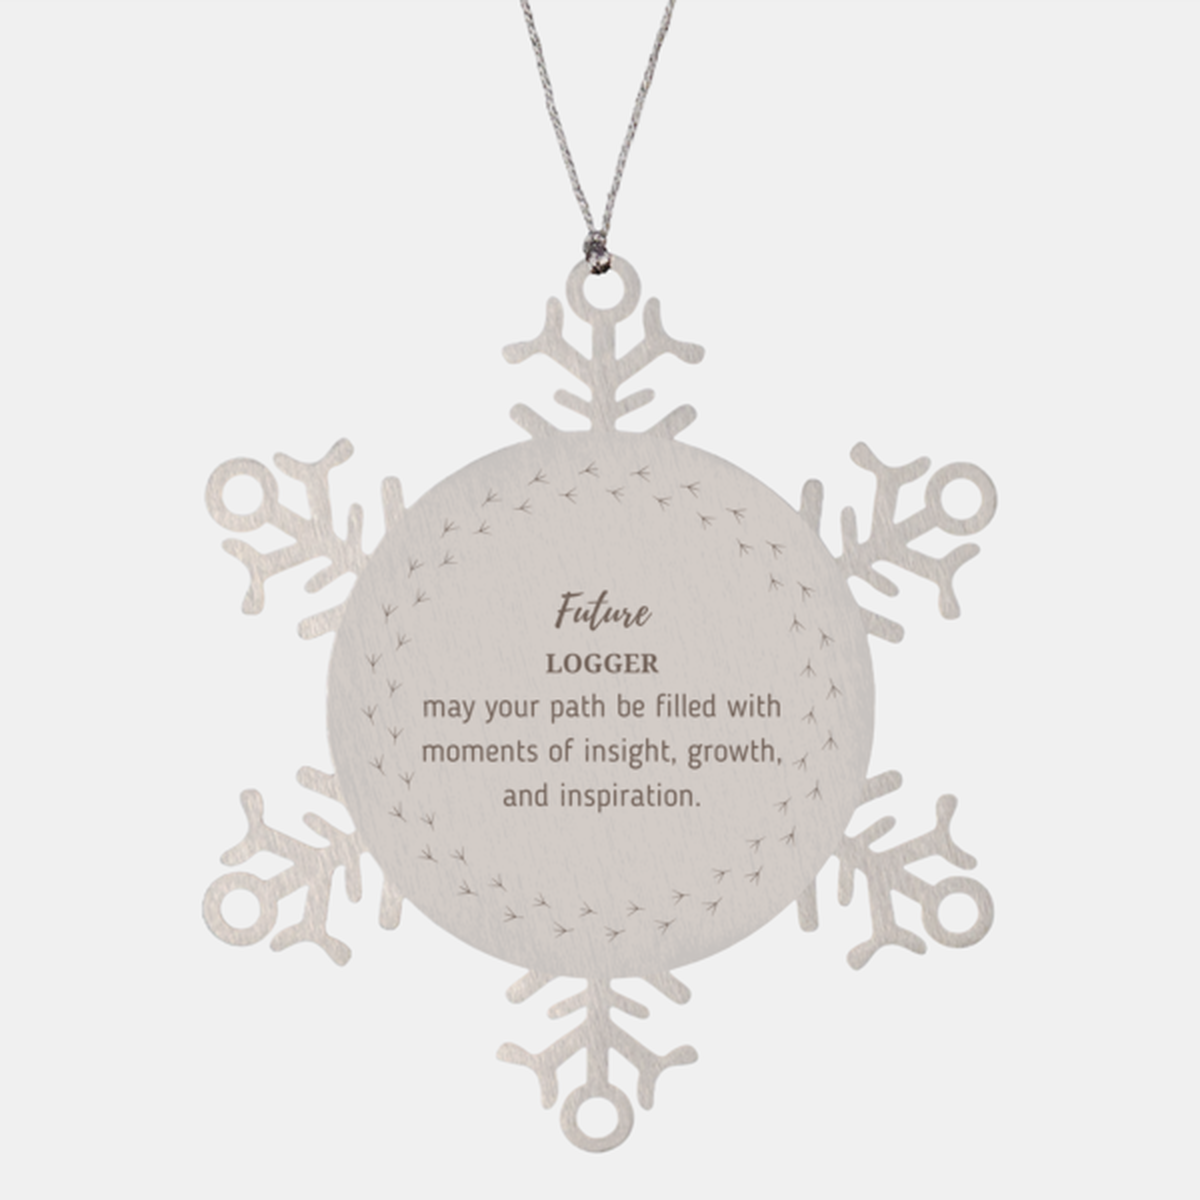 Future Logger Gifts, May your path be filled with moments of insight, Graduation Gifts for New Logger, Christmas Unique Snowflake Ornament For Men, Women, Friends